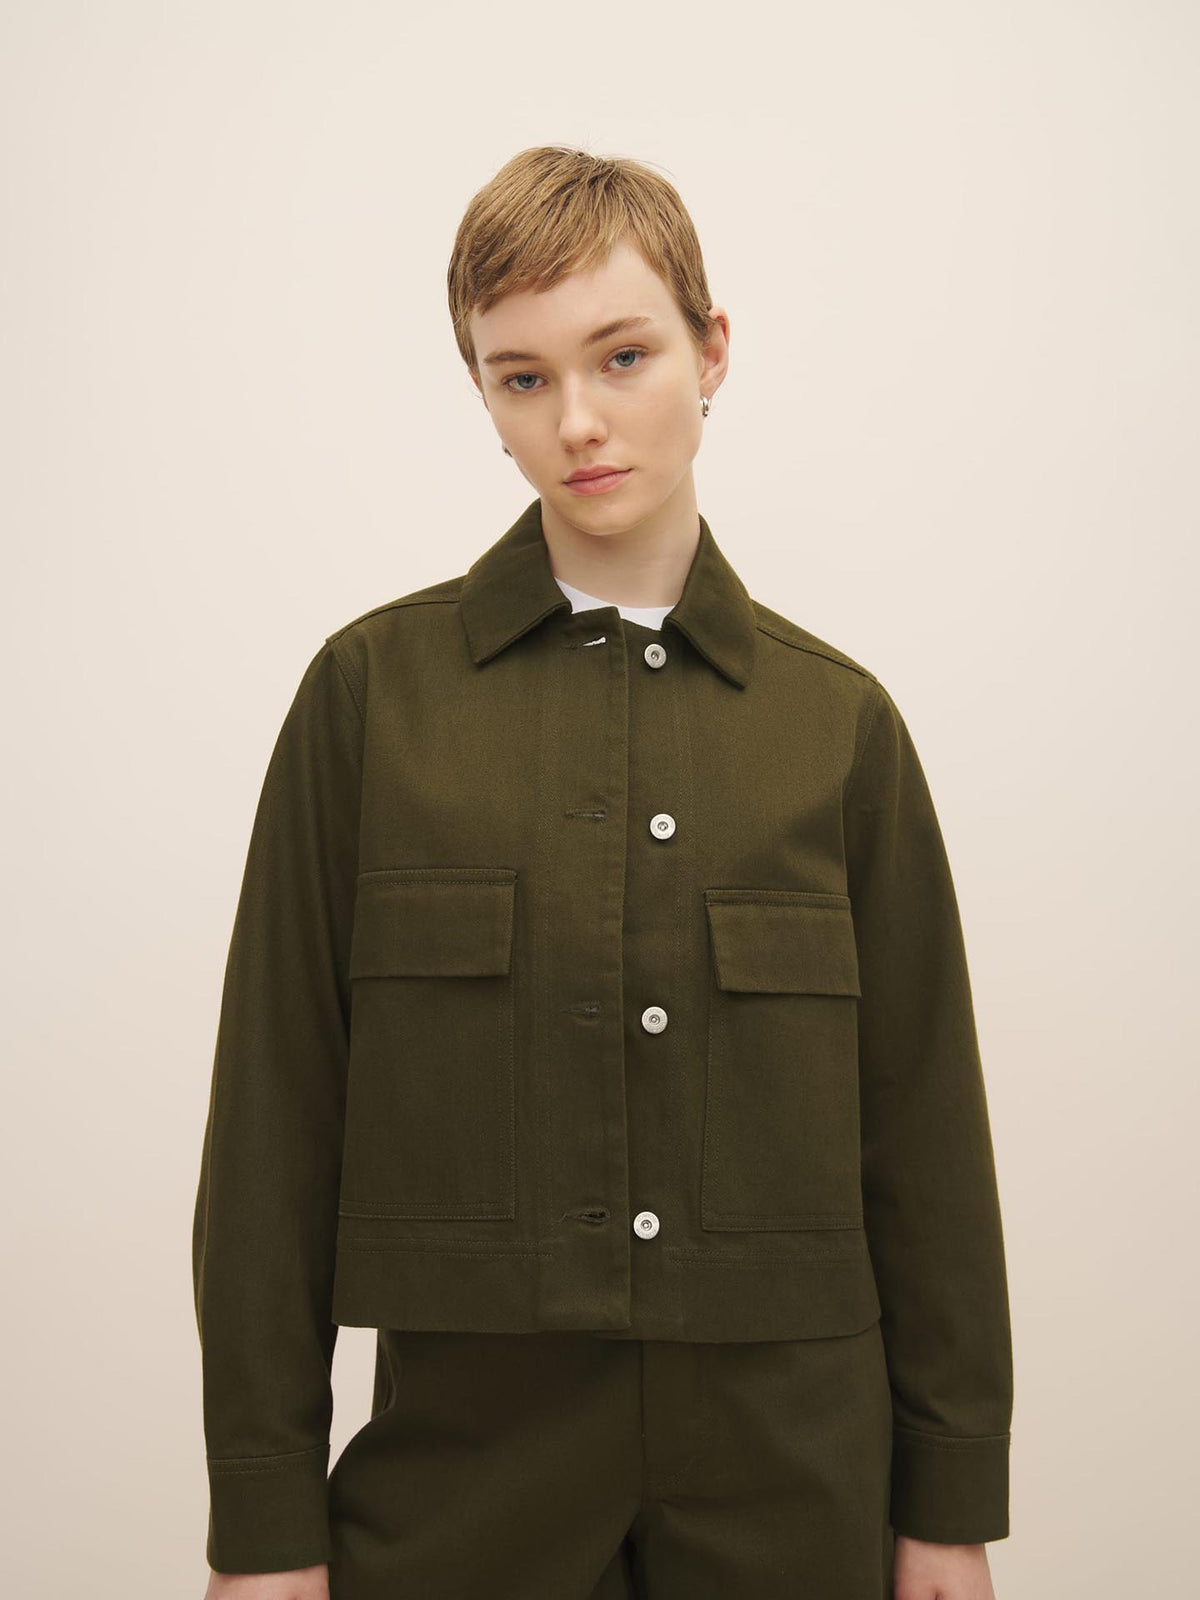 Woman in a Kowtow Mirror Jacket – Khaki Denim with a perfect fit and a collar, posing against a neutral background.